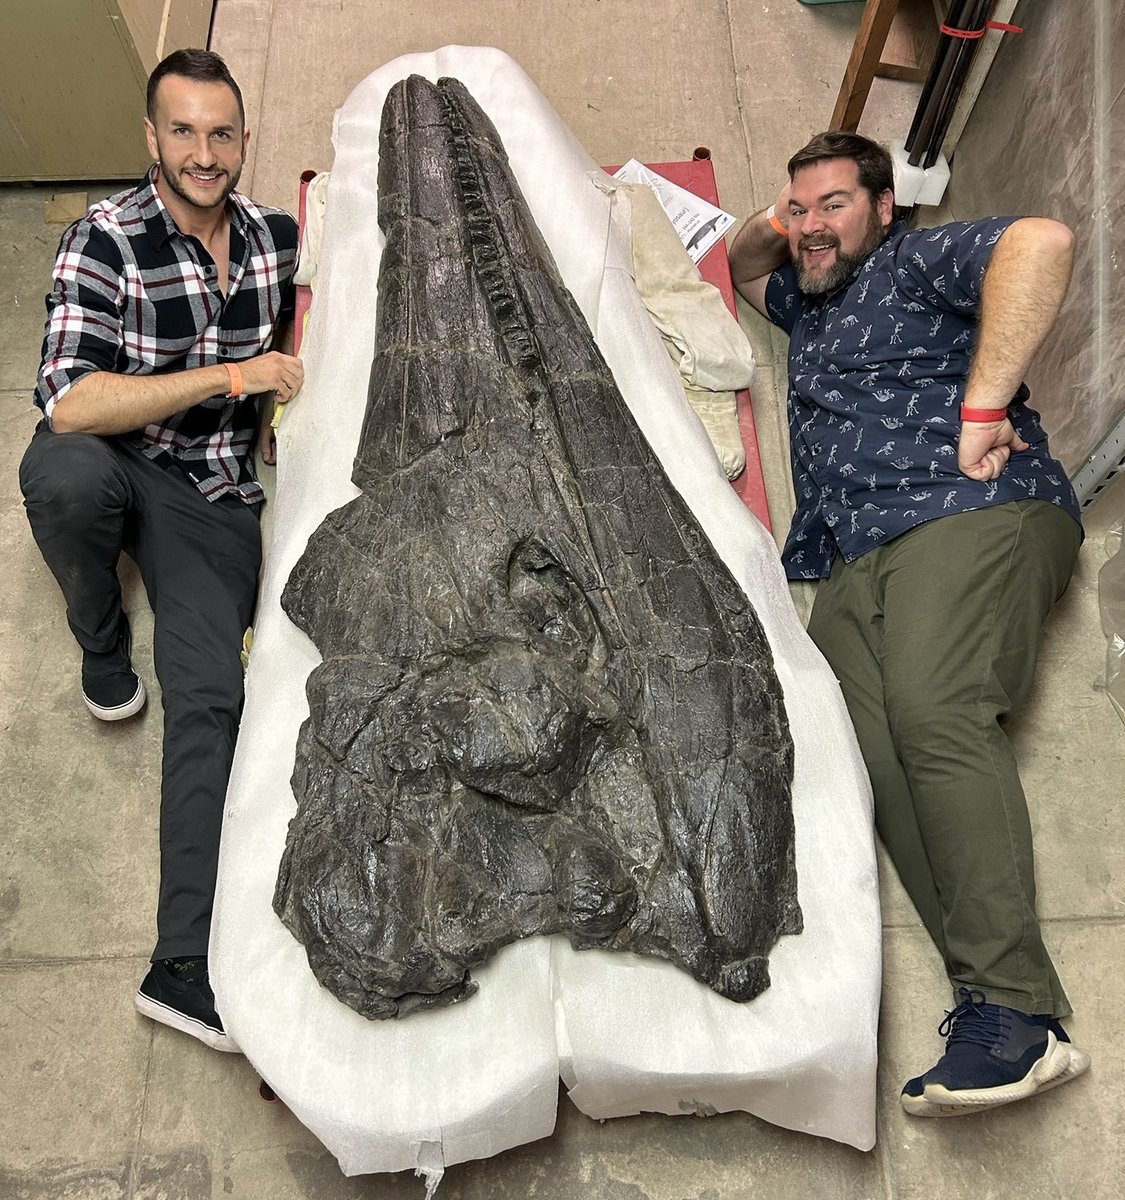 One of the largest ichthyosaur skulls in existence. This #FossilFriday is my birthday, so here’s the massive, real skull of Cymbospondylus youngorum, a giant from the Triassic of Nevada. Whilst in LA, I visited @NHMLA as part of my @Royalcom1851 research. With @DinosaurPodcast